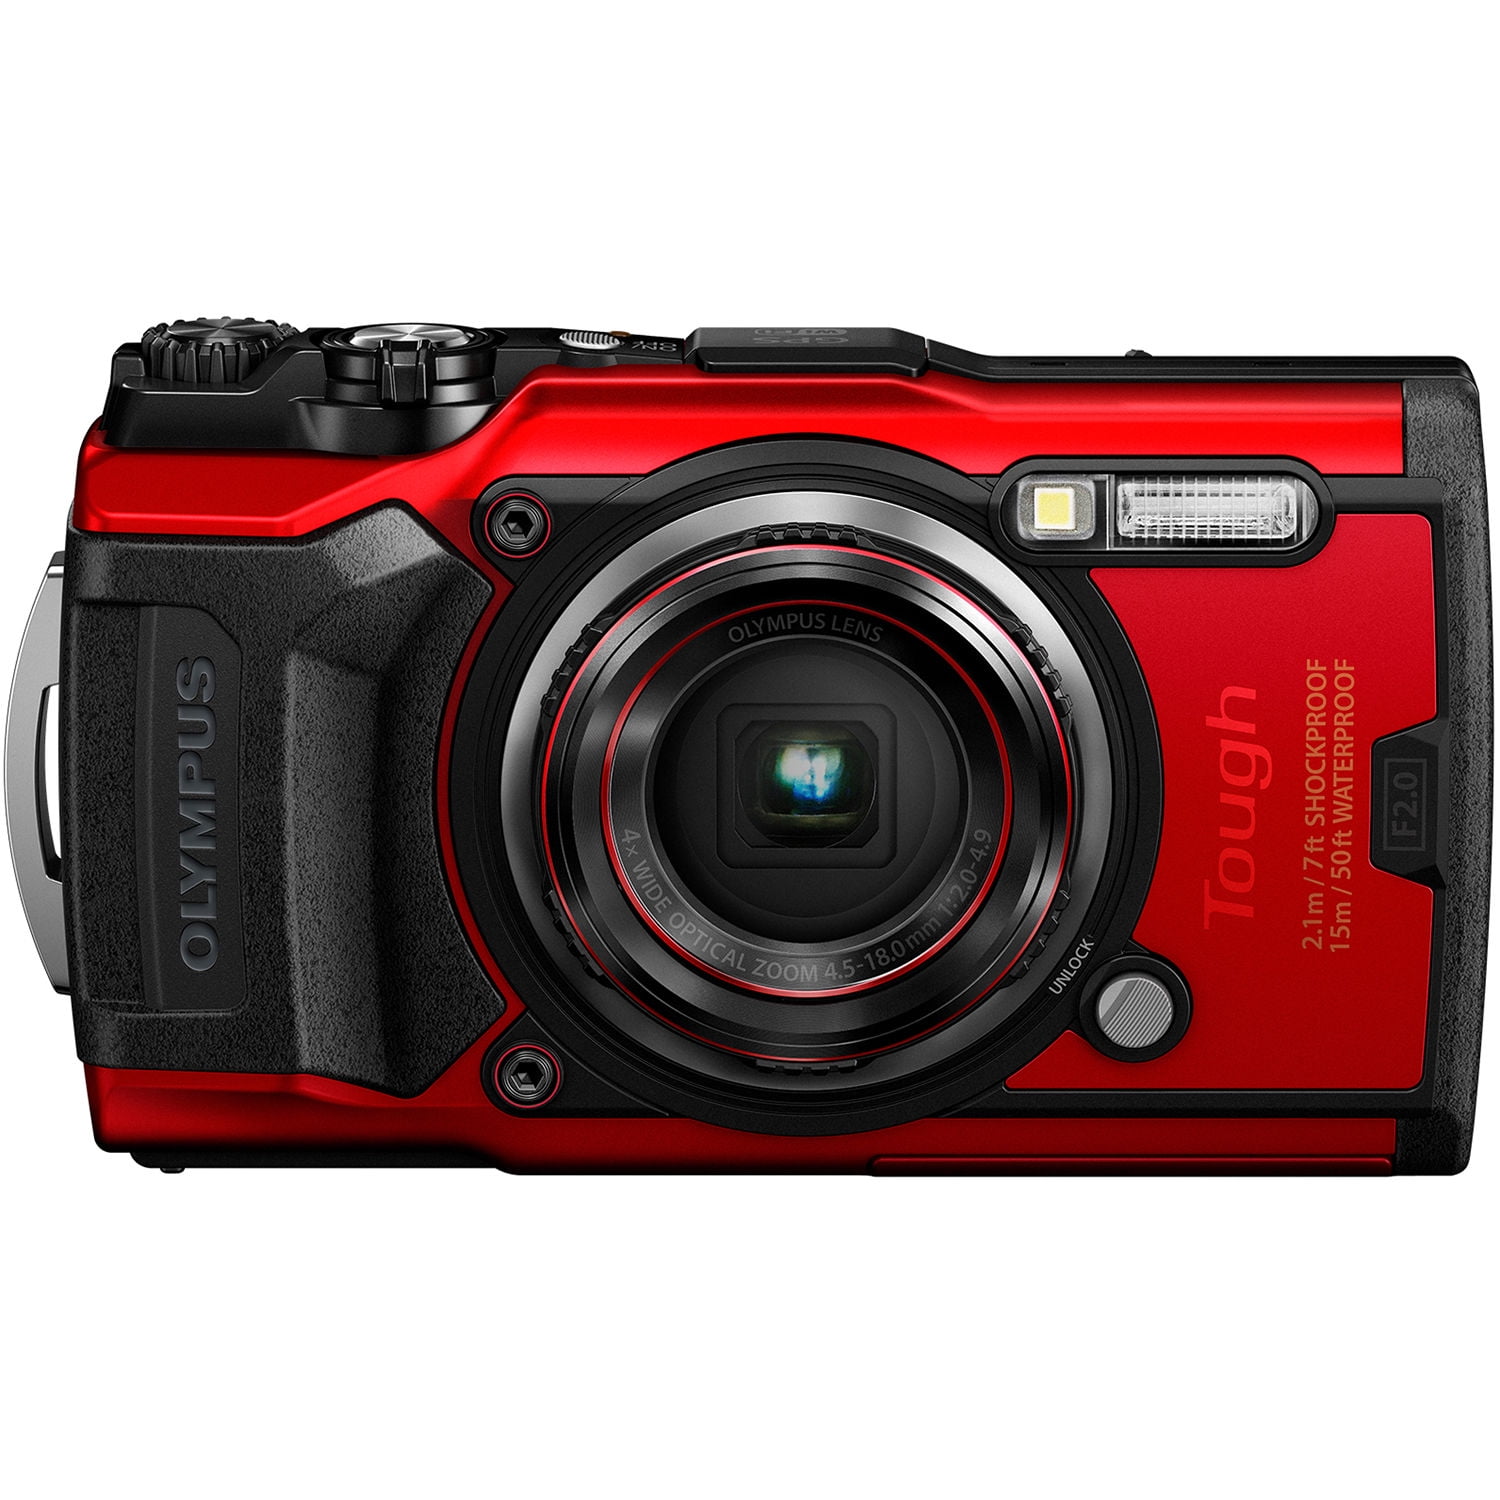 Red TG-6 Tough Camera - Olympus Compact